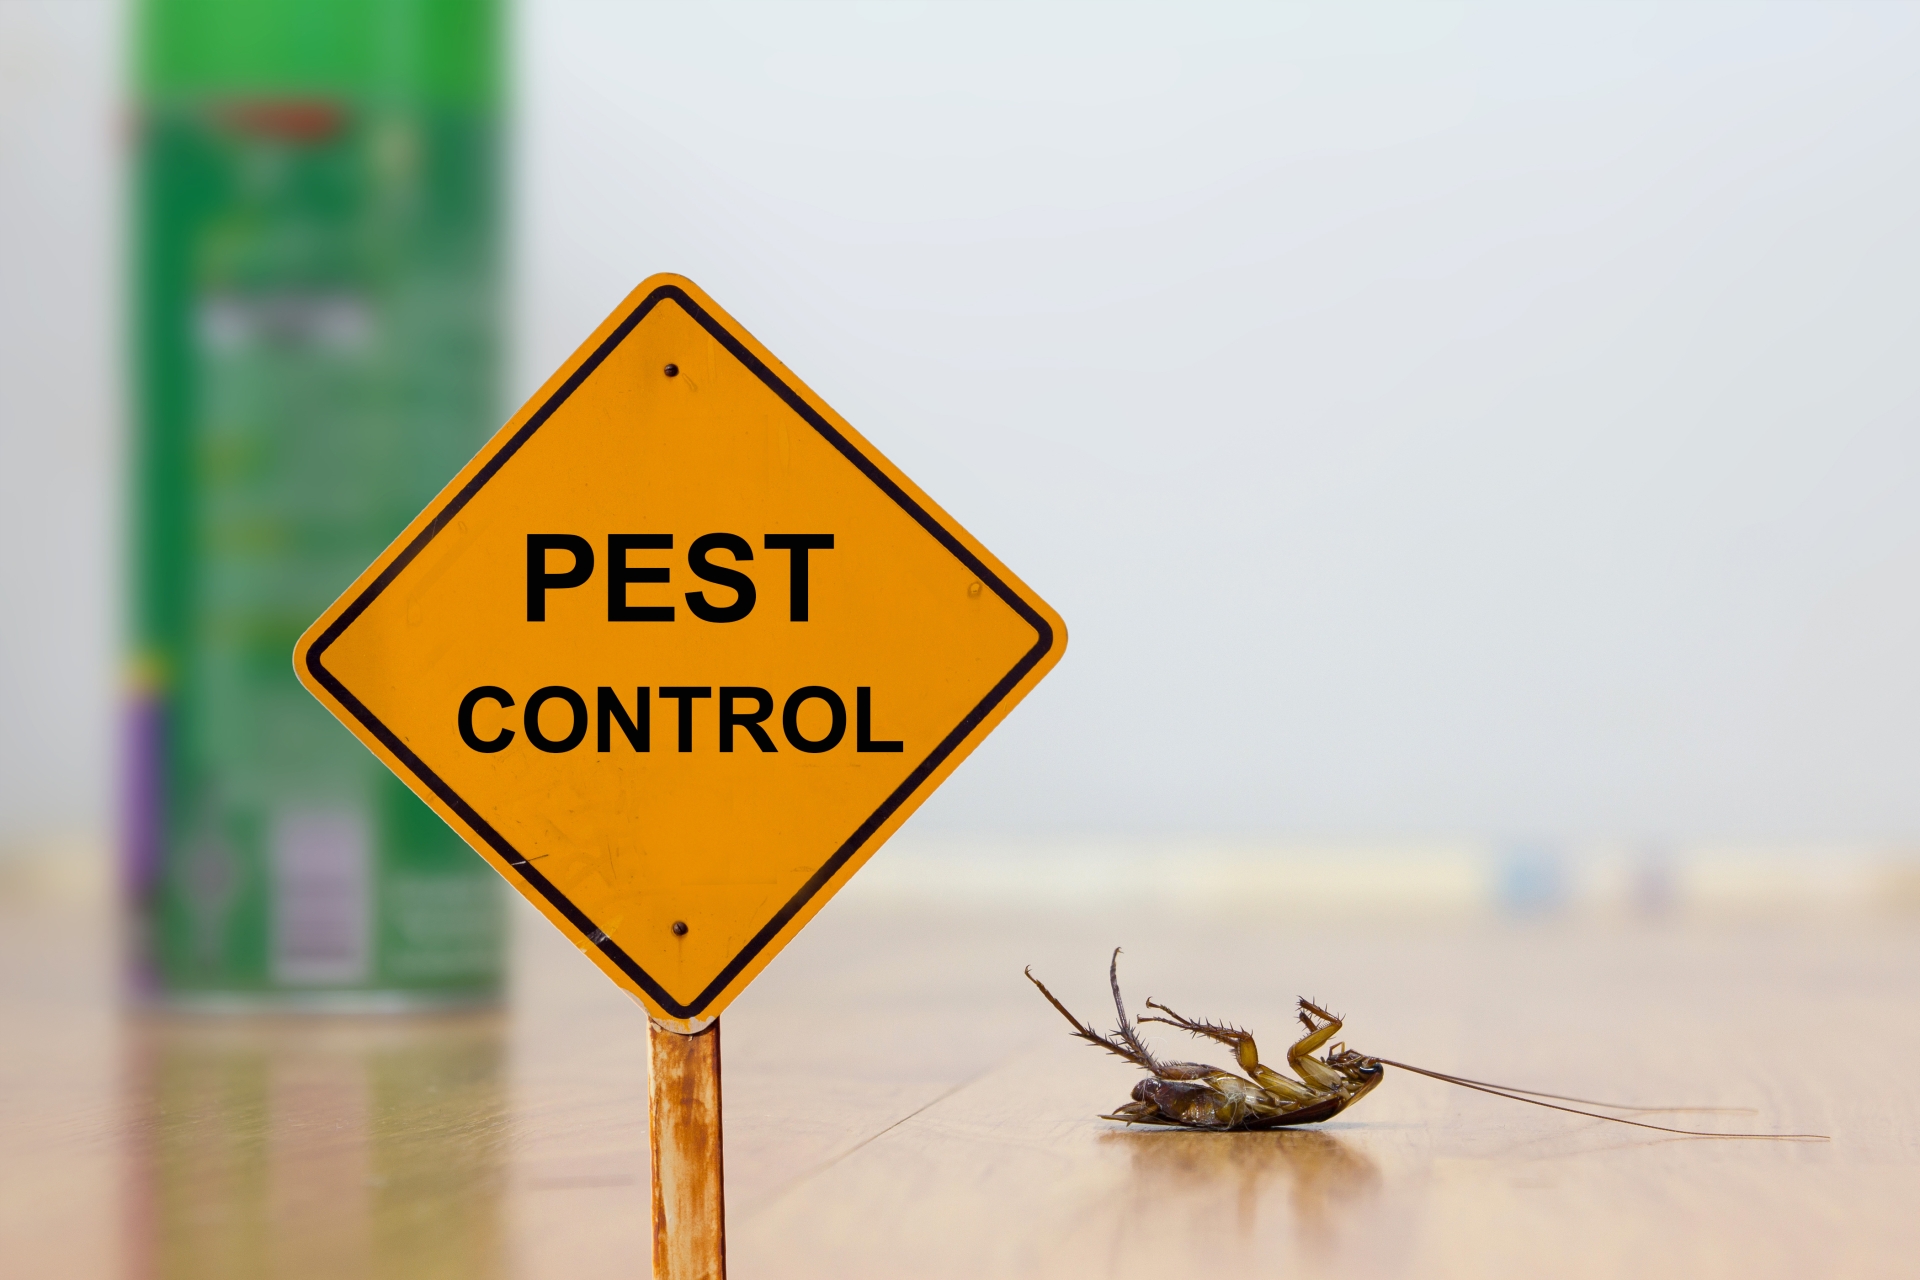 24 Hour Pest Control, Pest Control in Camberwell, SE5. Call Now 020 8166 9746